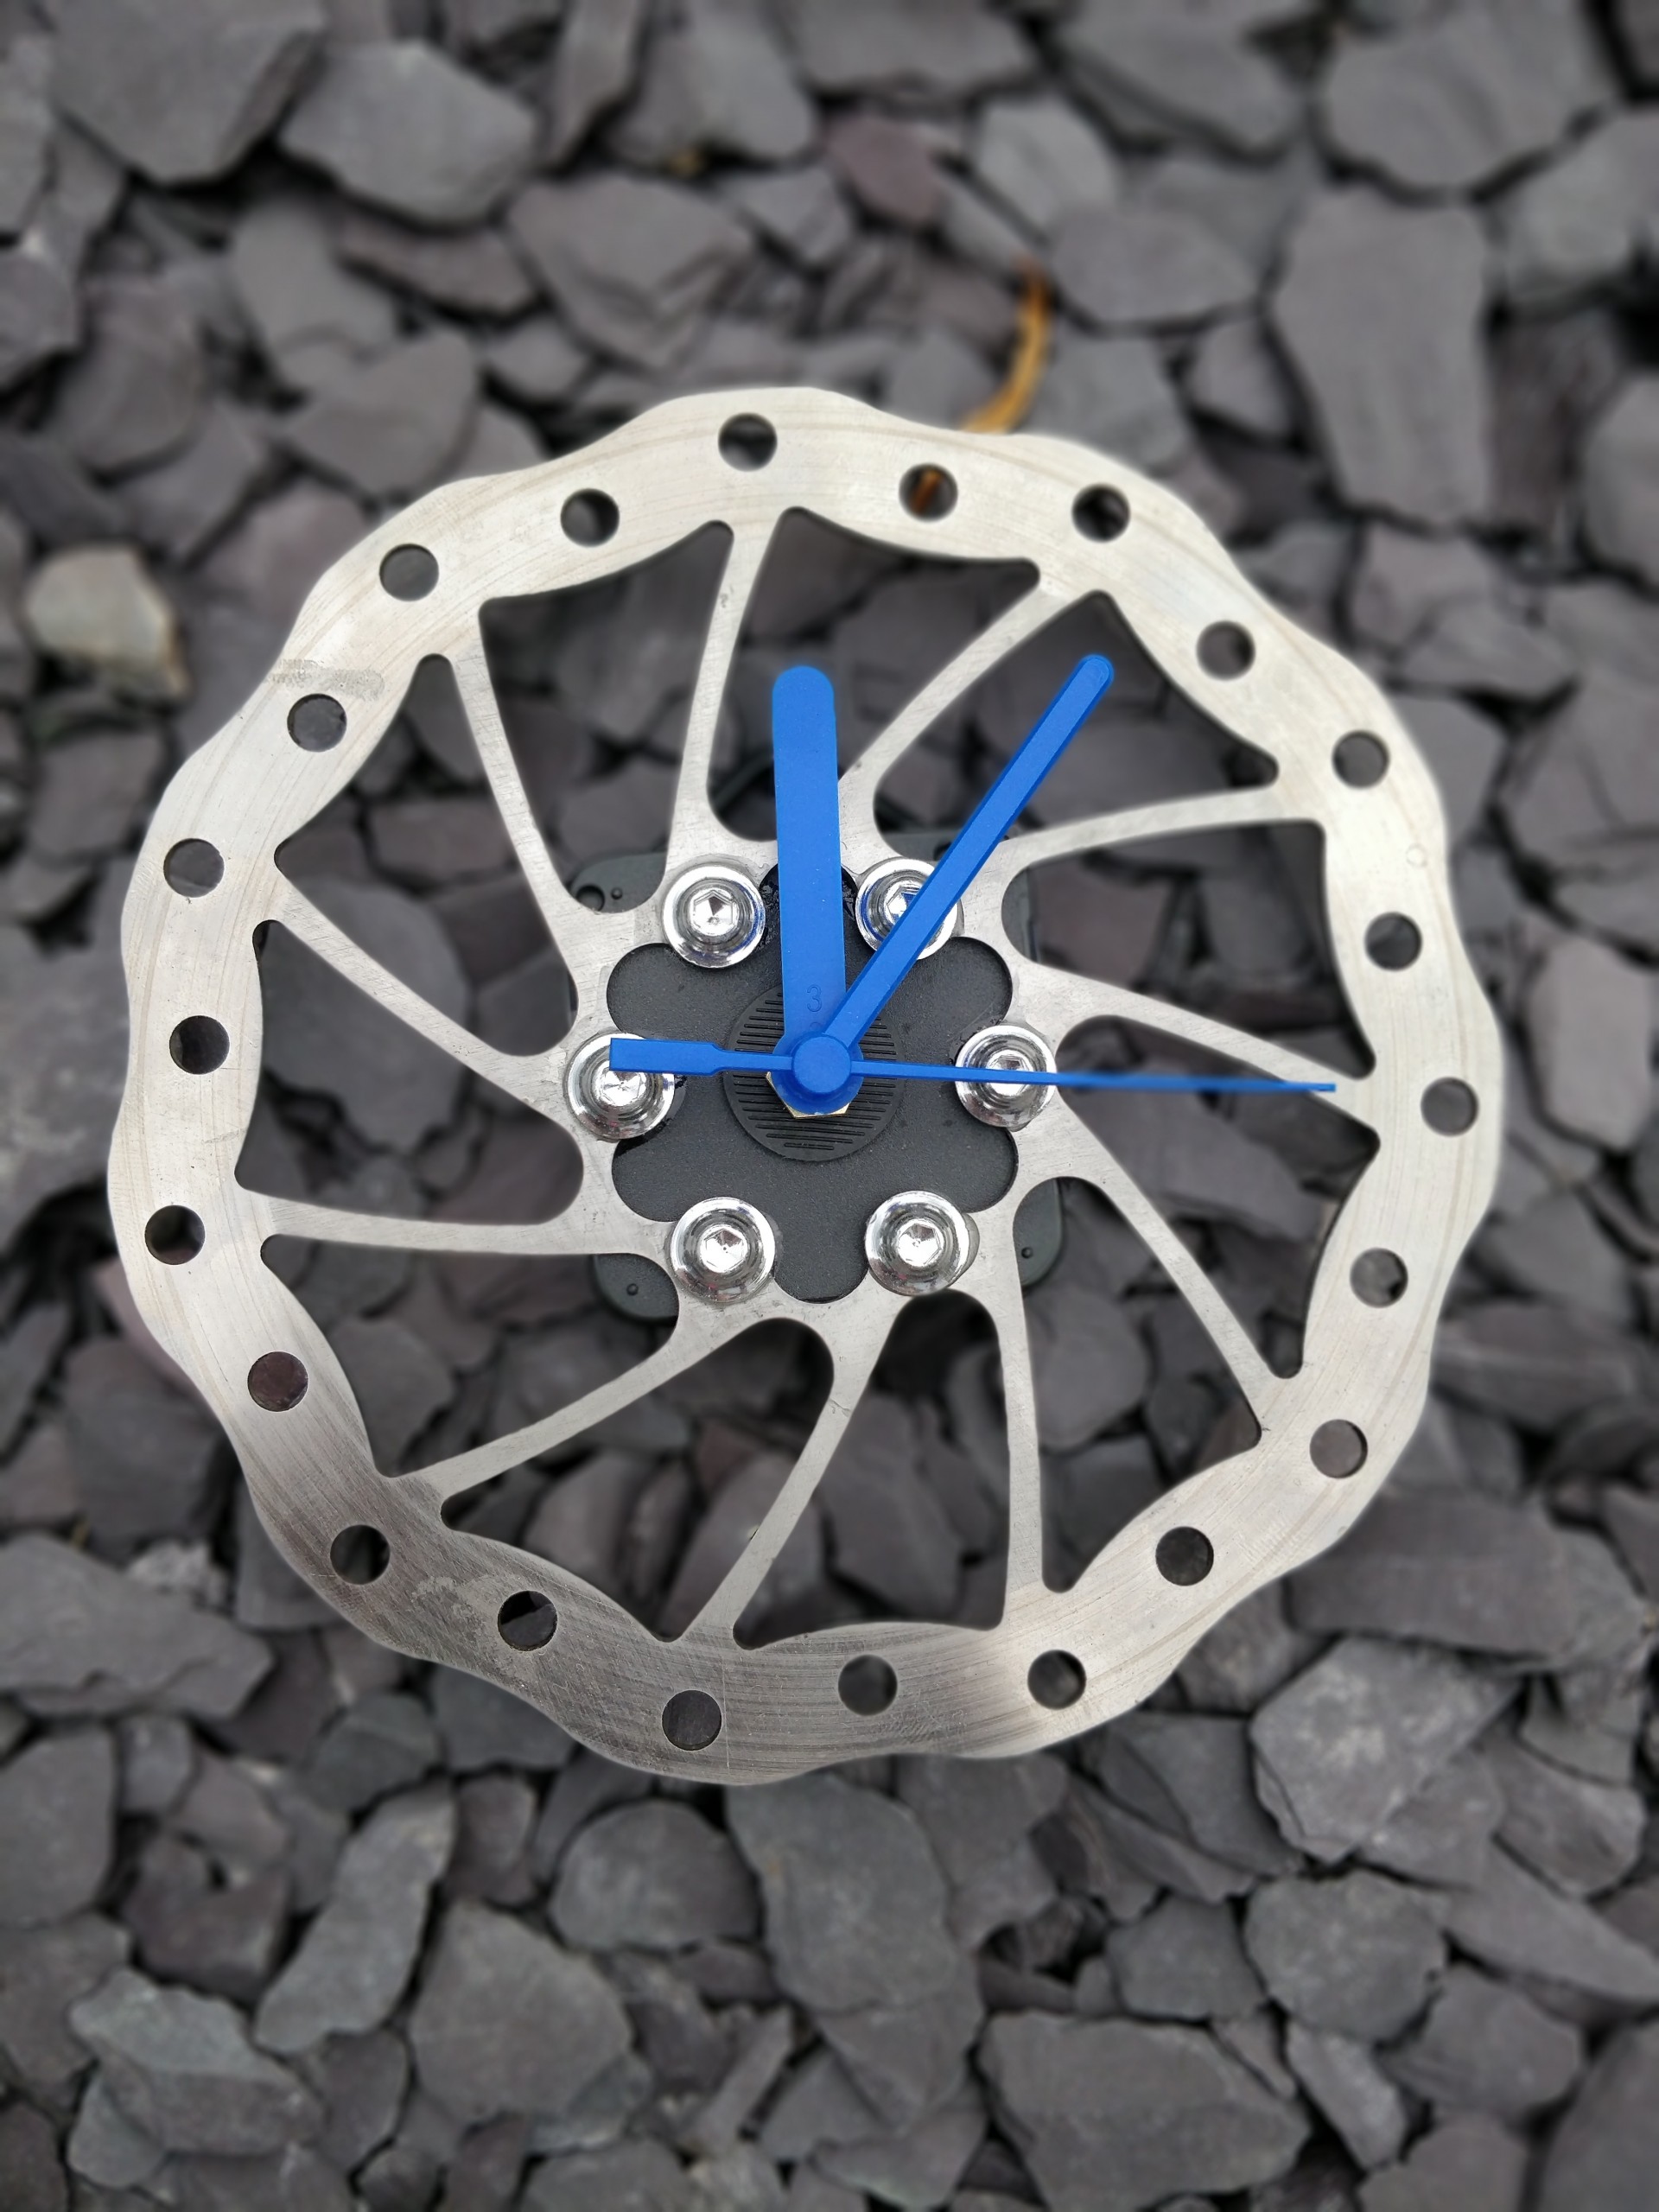 Disc brake rotor clock from Outfit Moray Bike Revolution